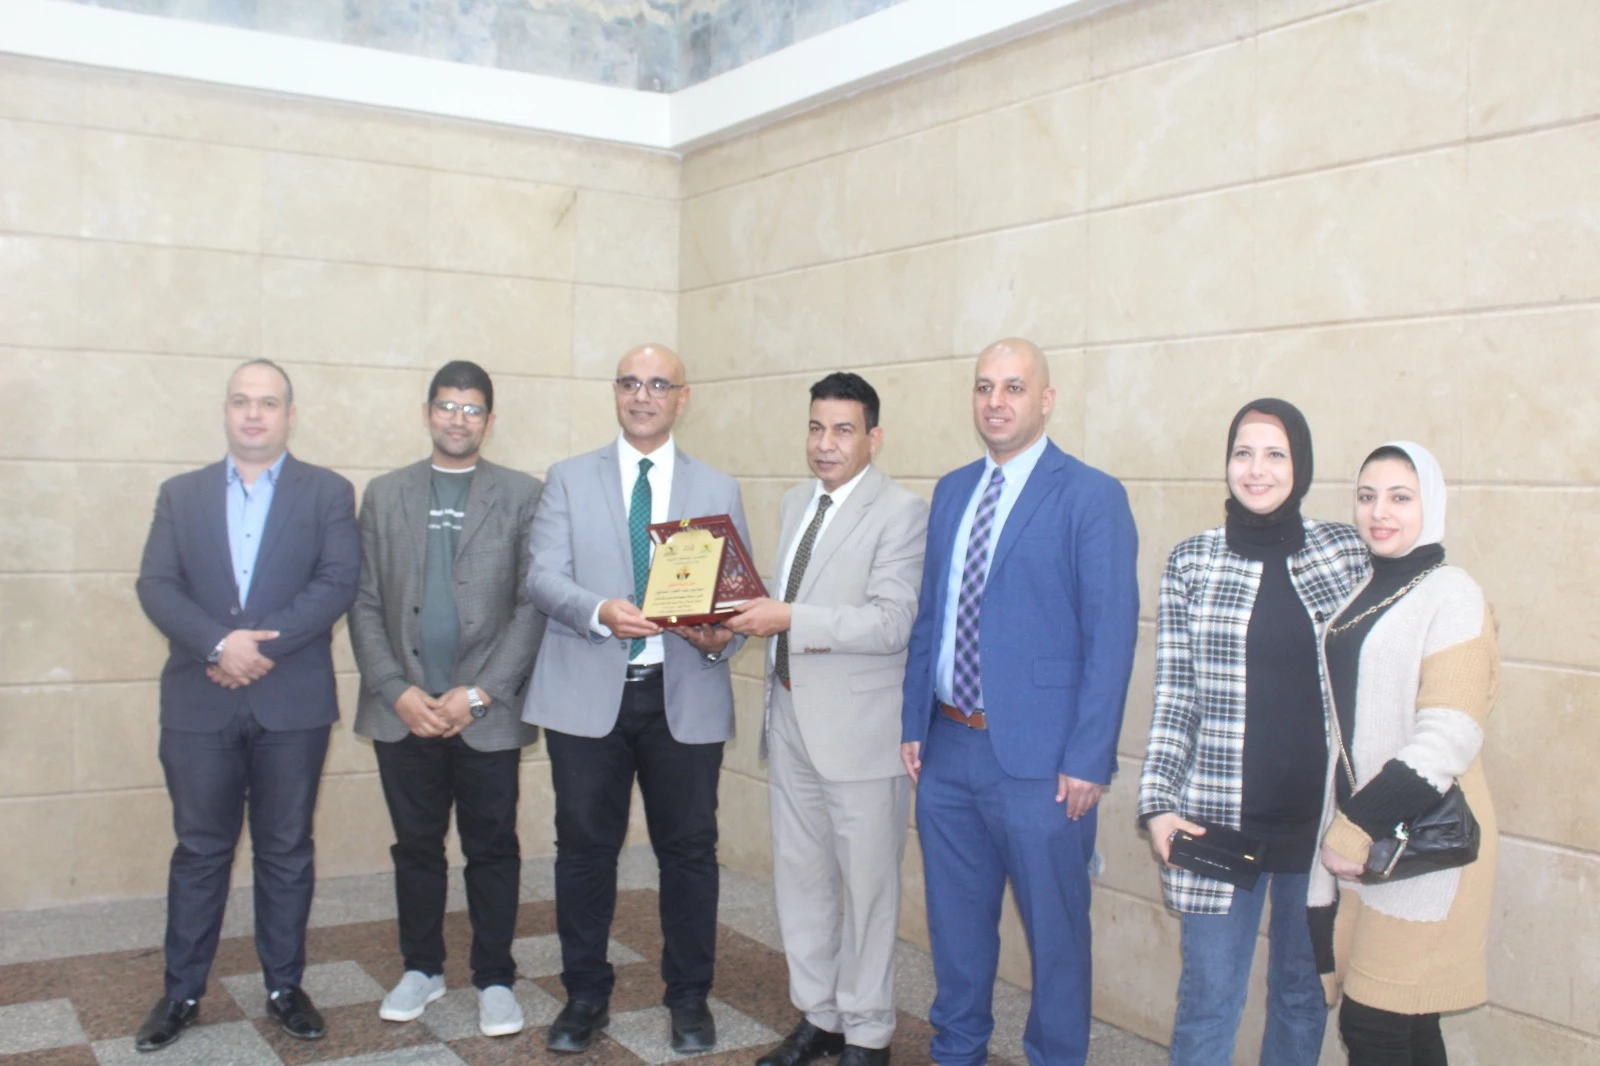 The Deanship of Student Affairs at the Navy Academy in Abu Qir received students from the Faculty of Agriculture at Minya University on: 3/4/20249